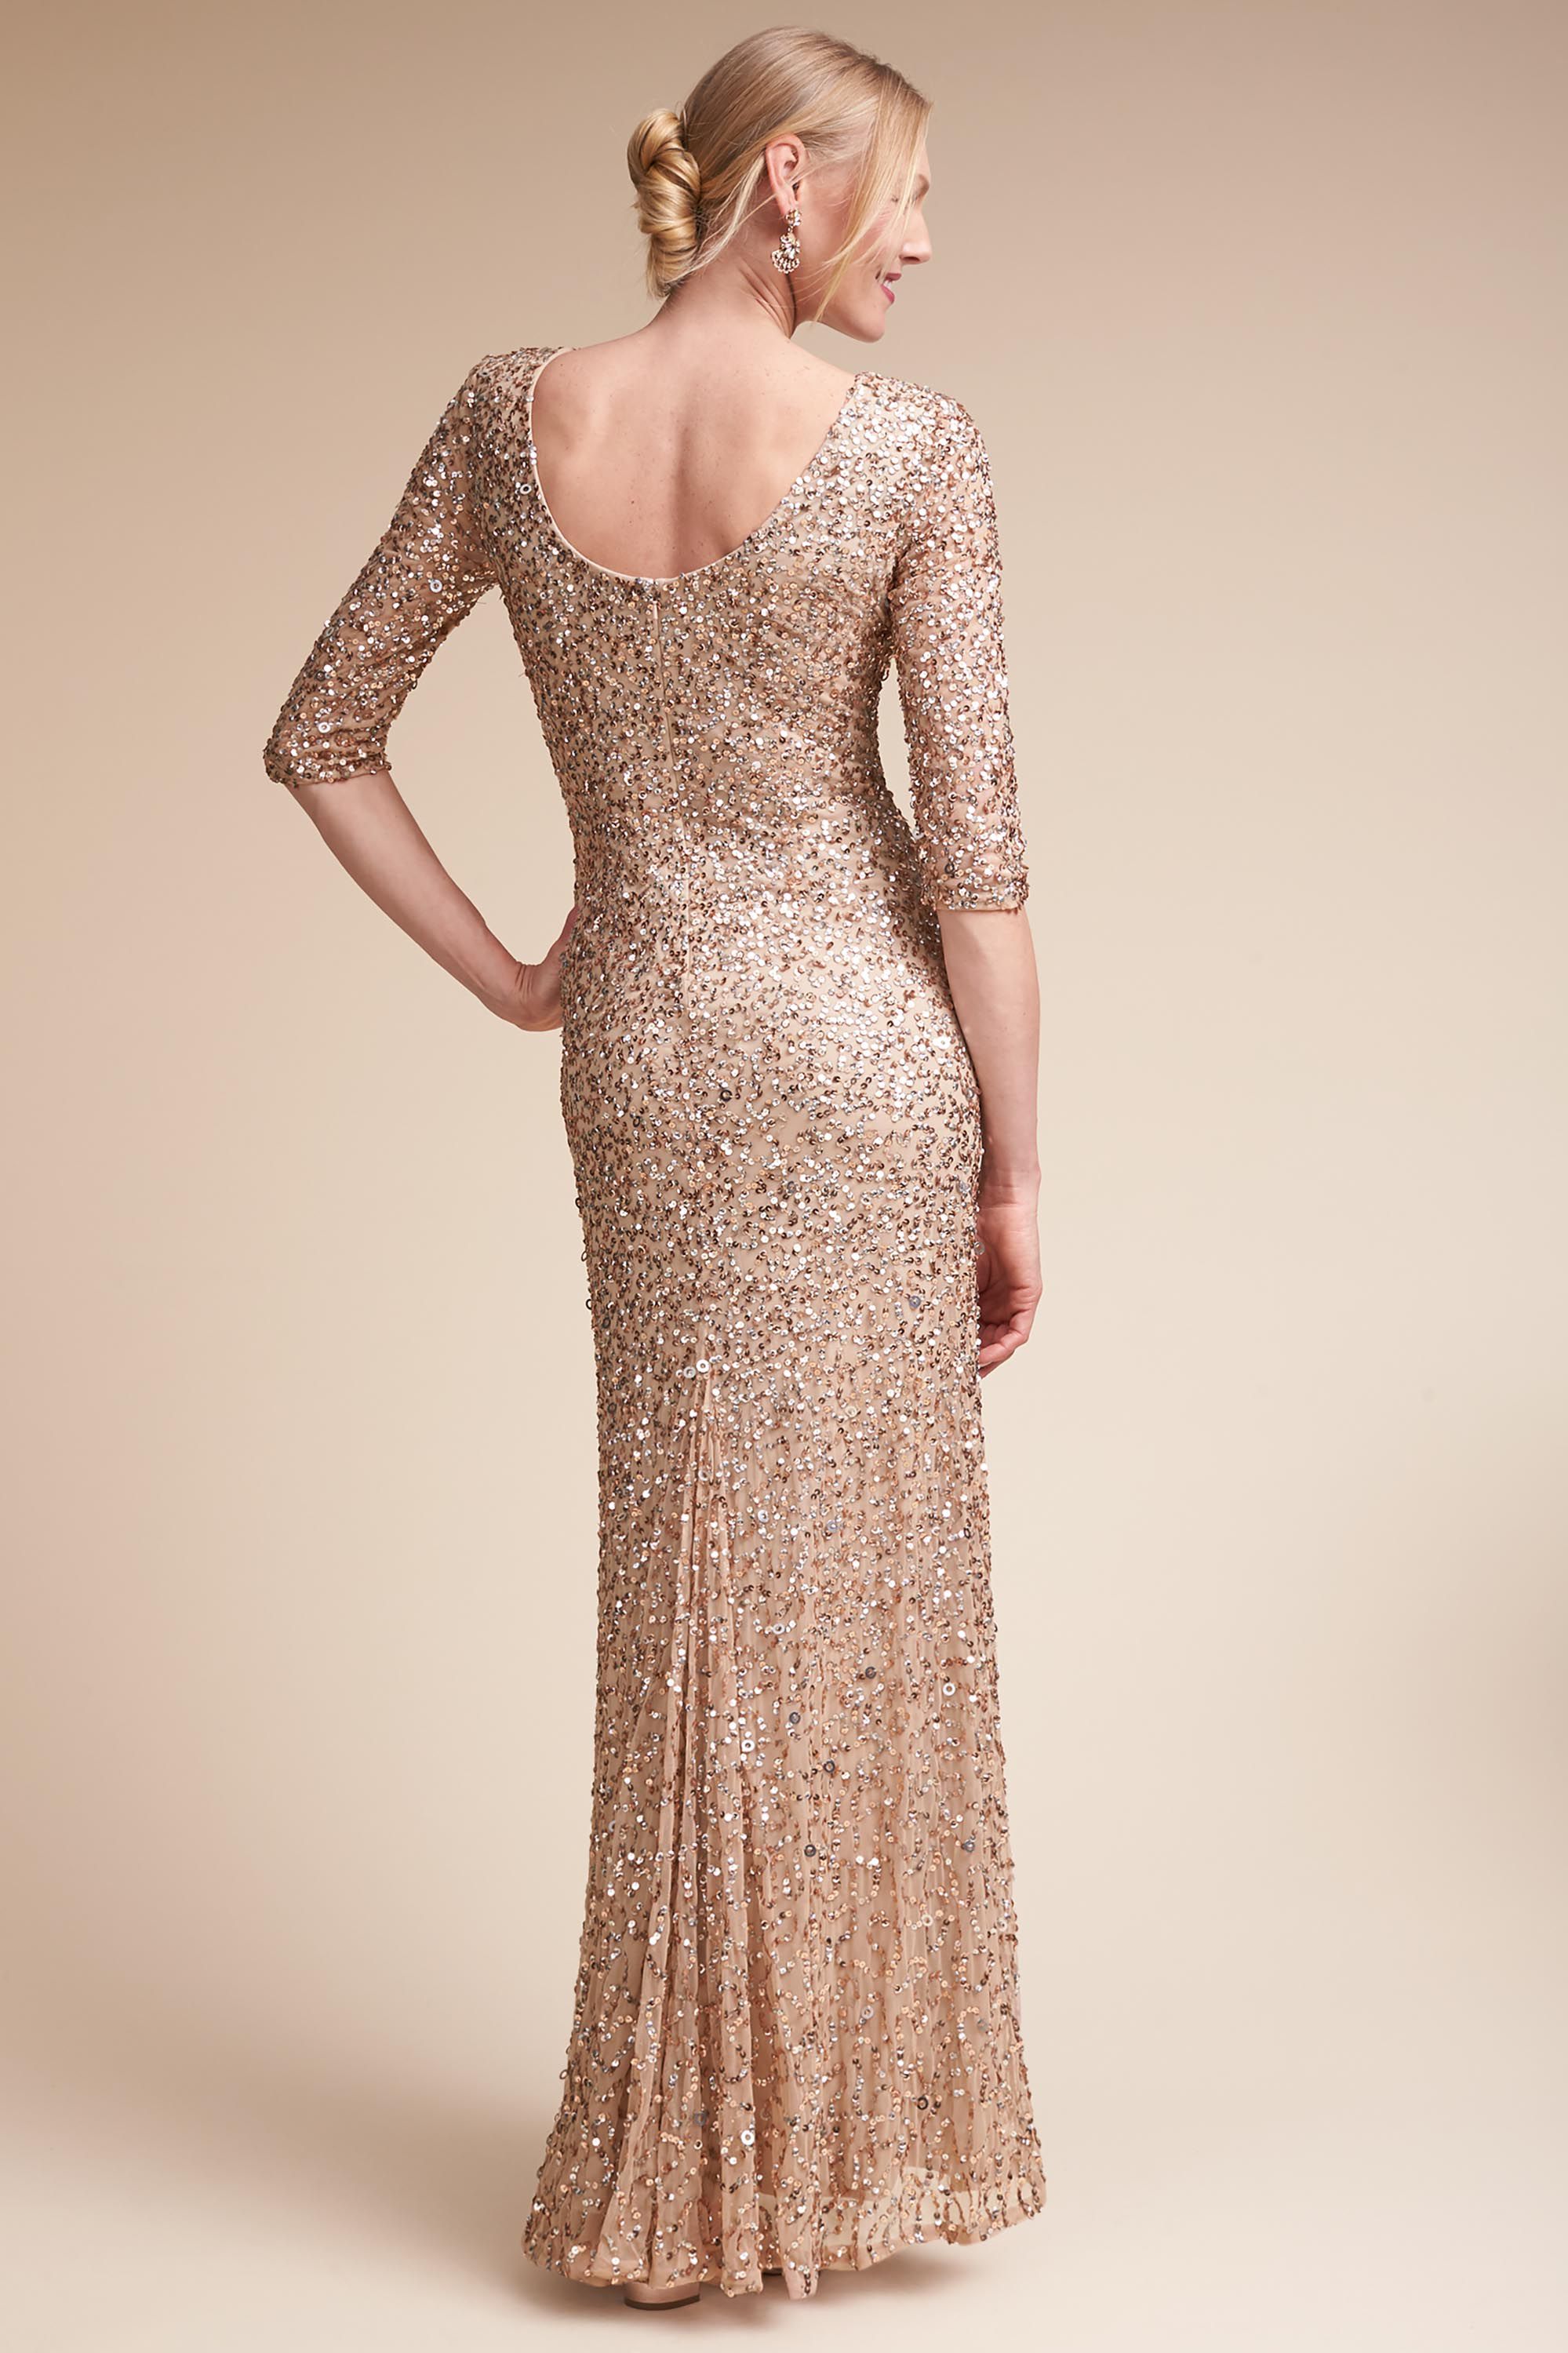 Special Occasion Dresses |BHLDN